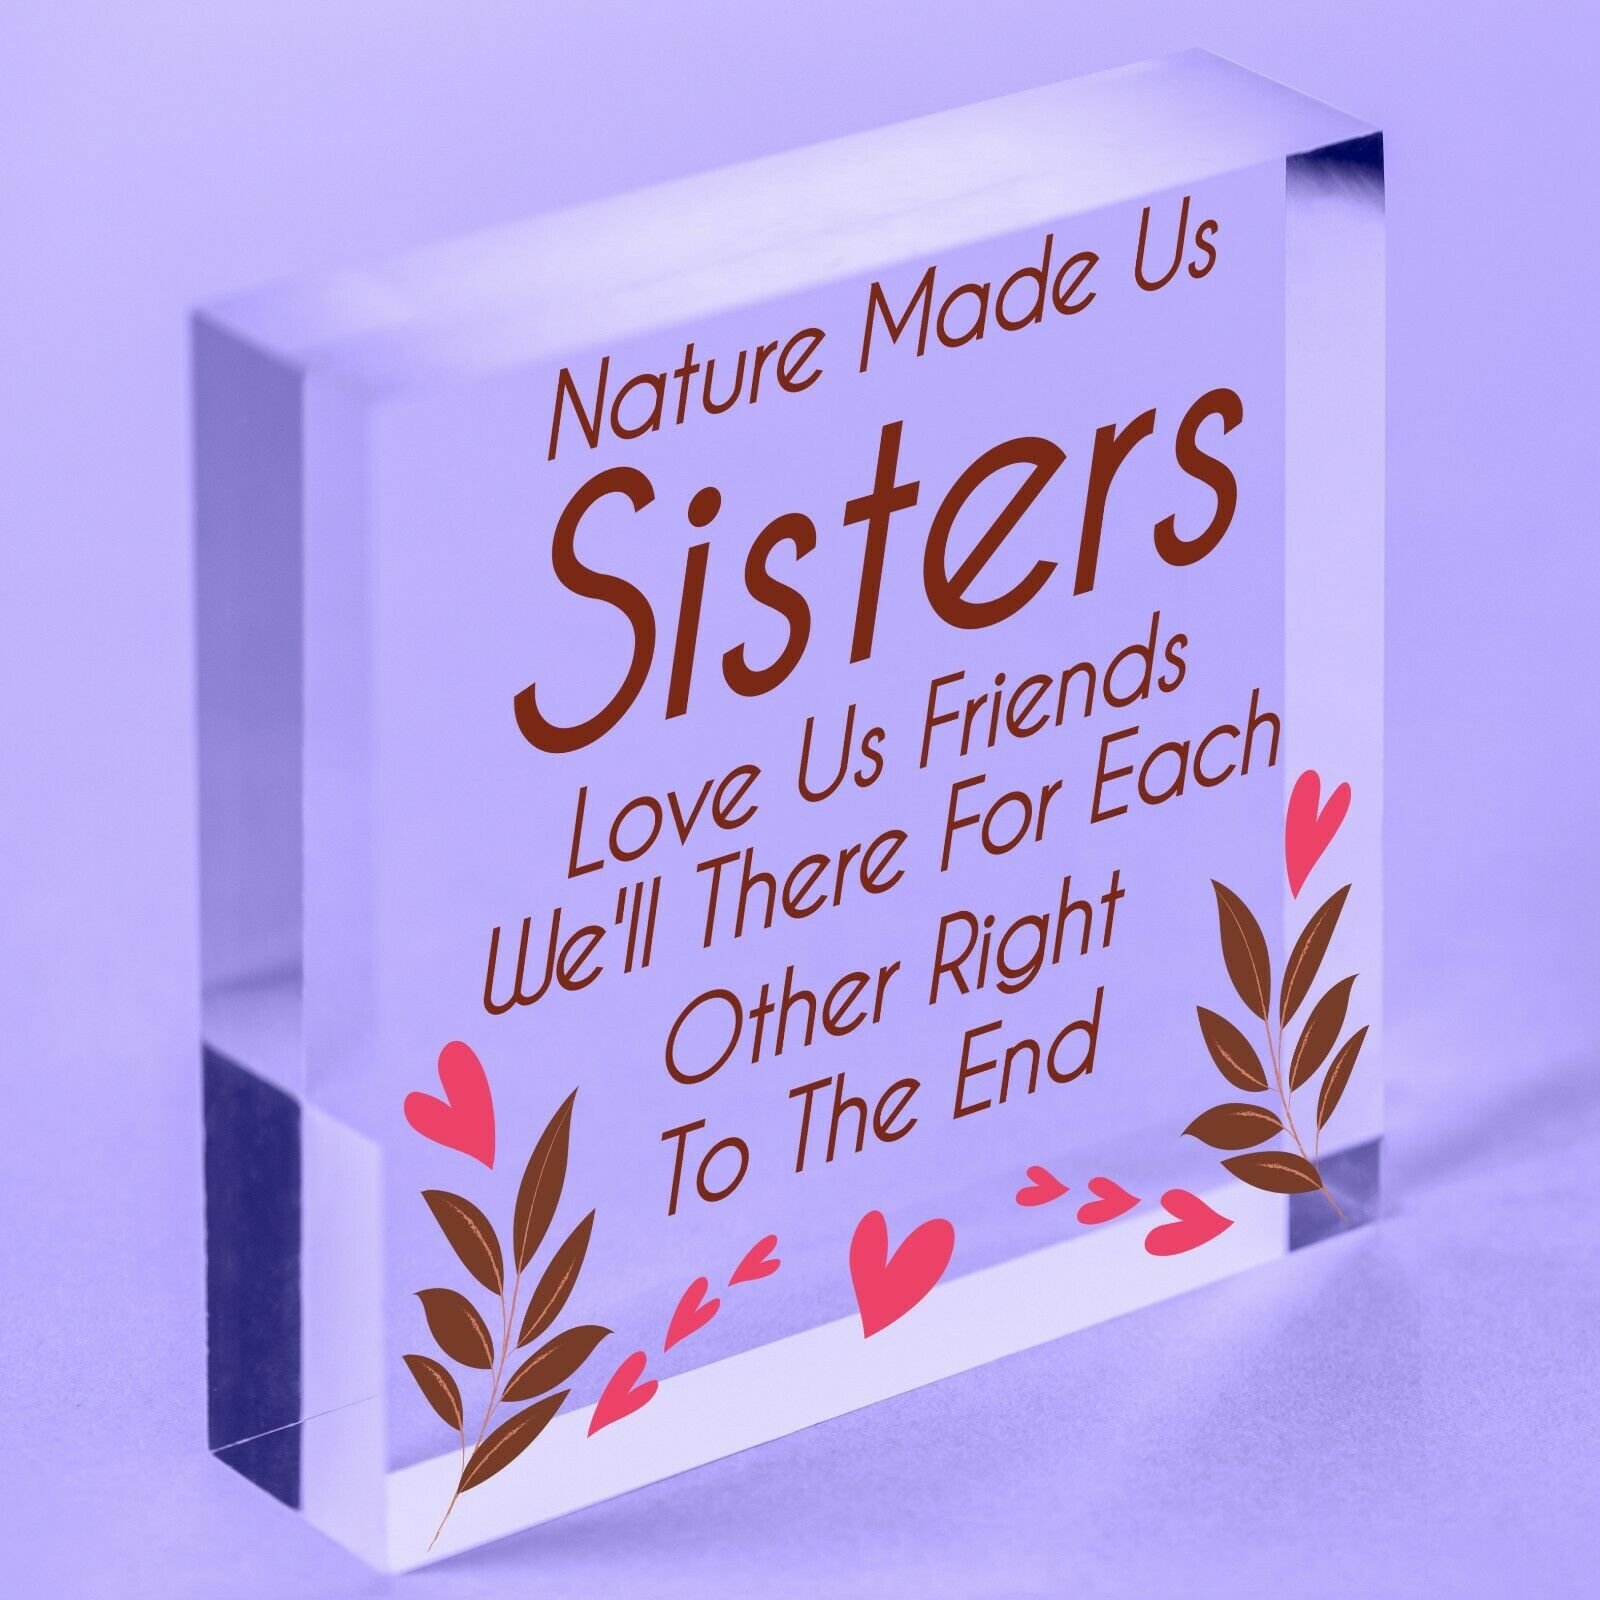 Nature Made Us Sisters Friend To The End Acrylic Heart Heart Sister Love Plaque